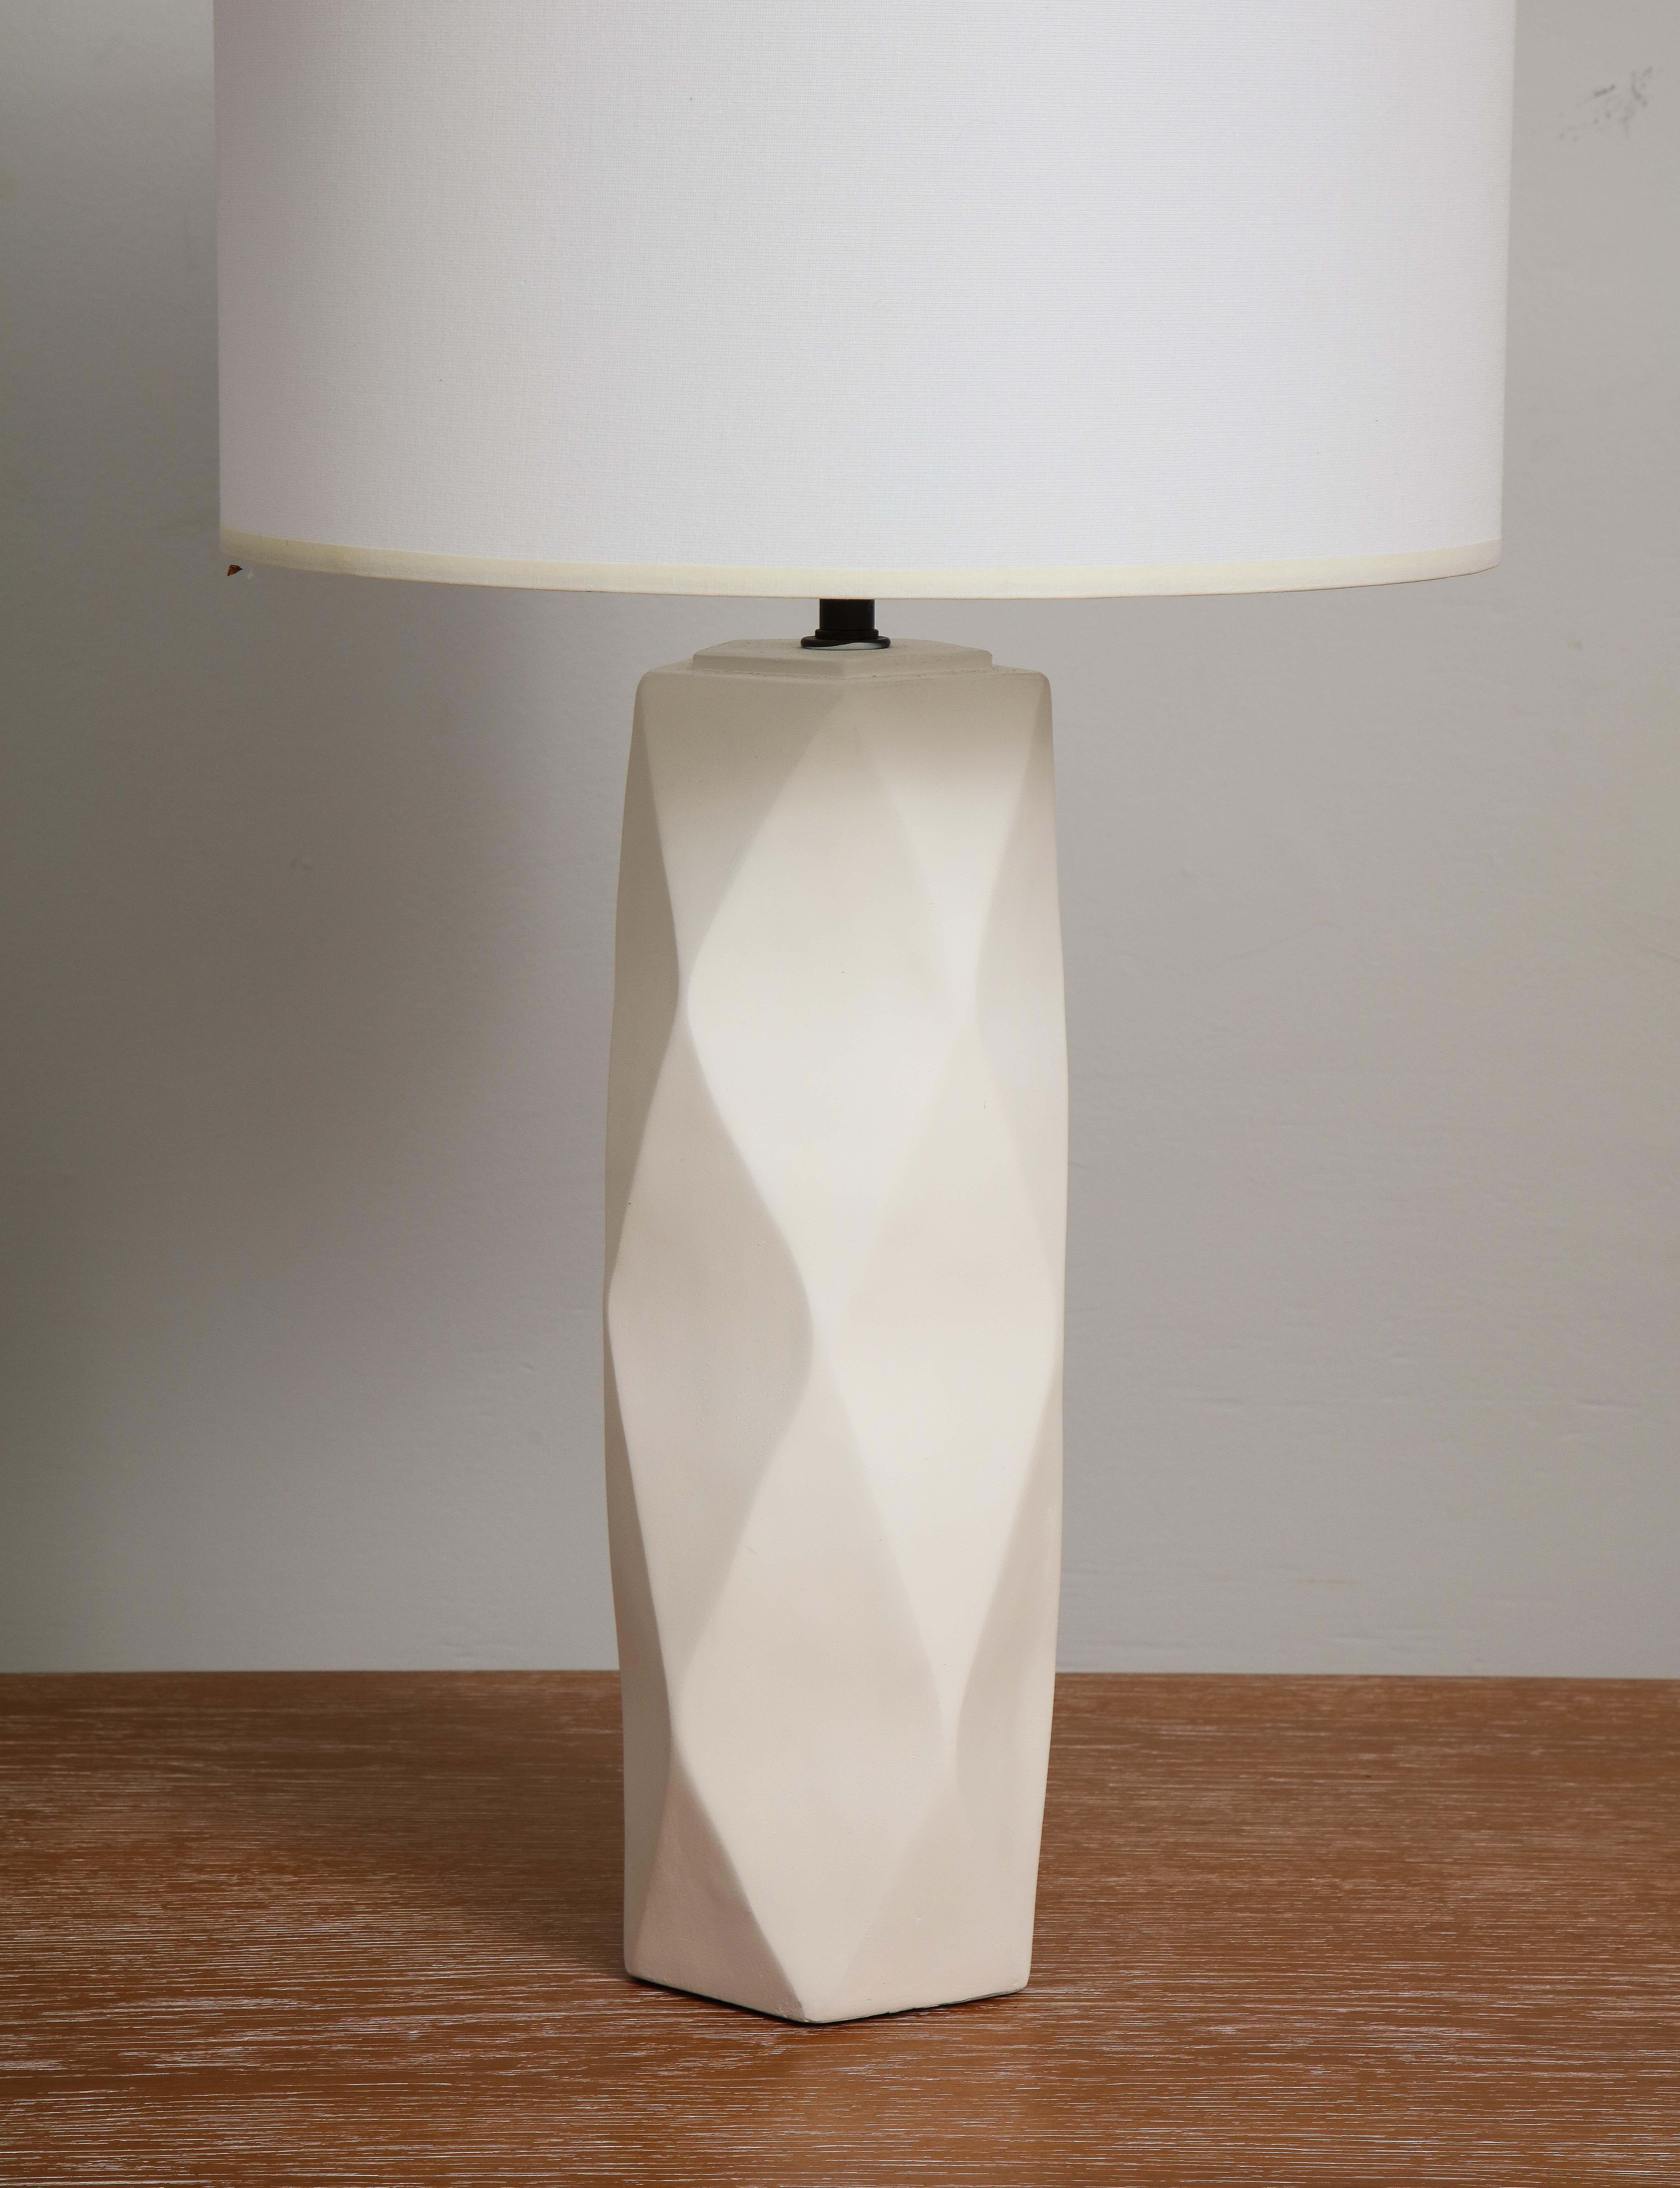 Custom pair of cubist inspired plaster lamps.
The lamp shades are not included.
Please inquire about customization.
Lead Time is 8-10 weeks.